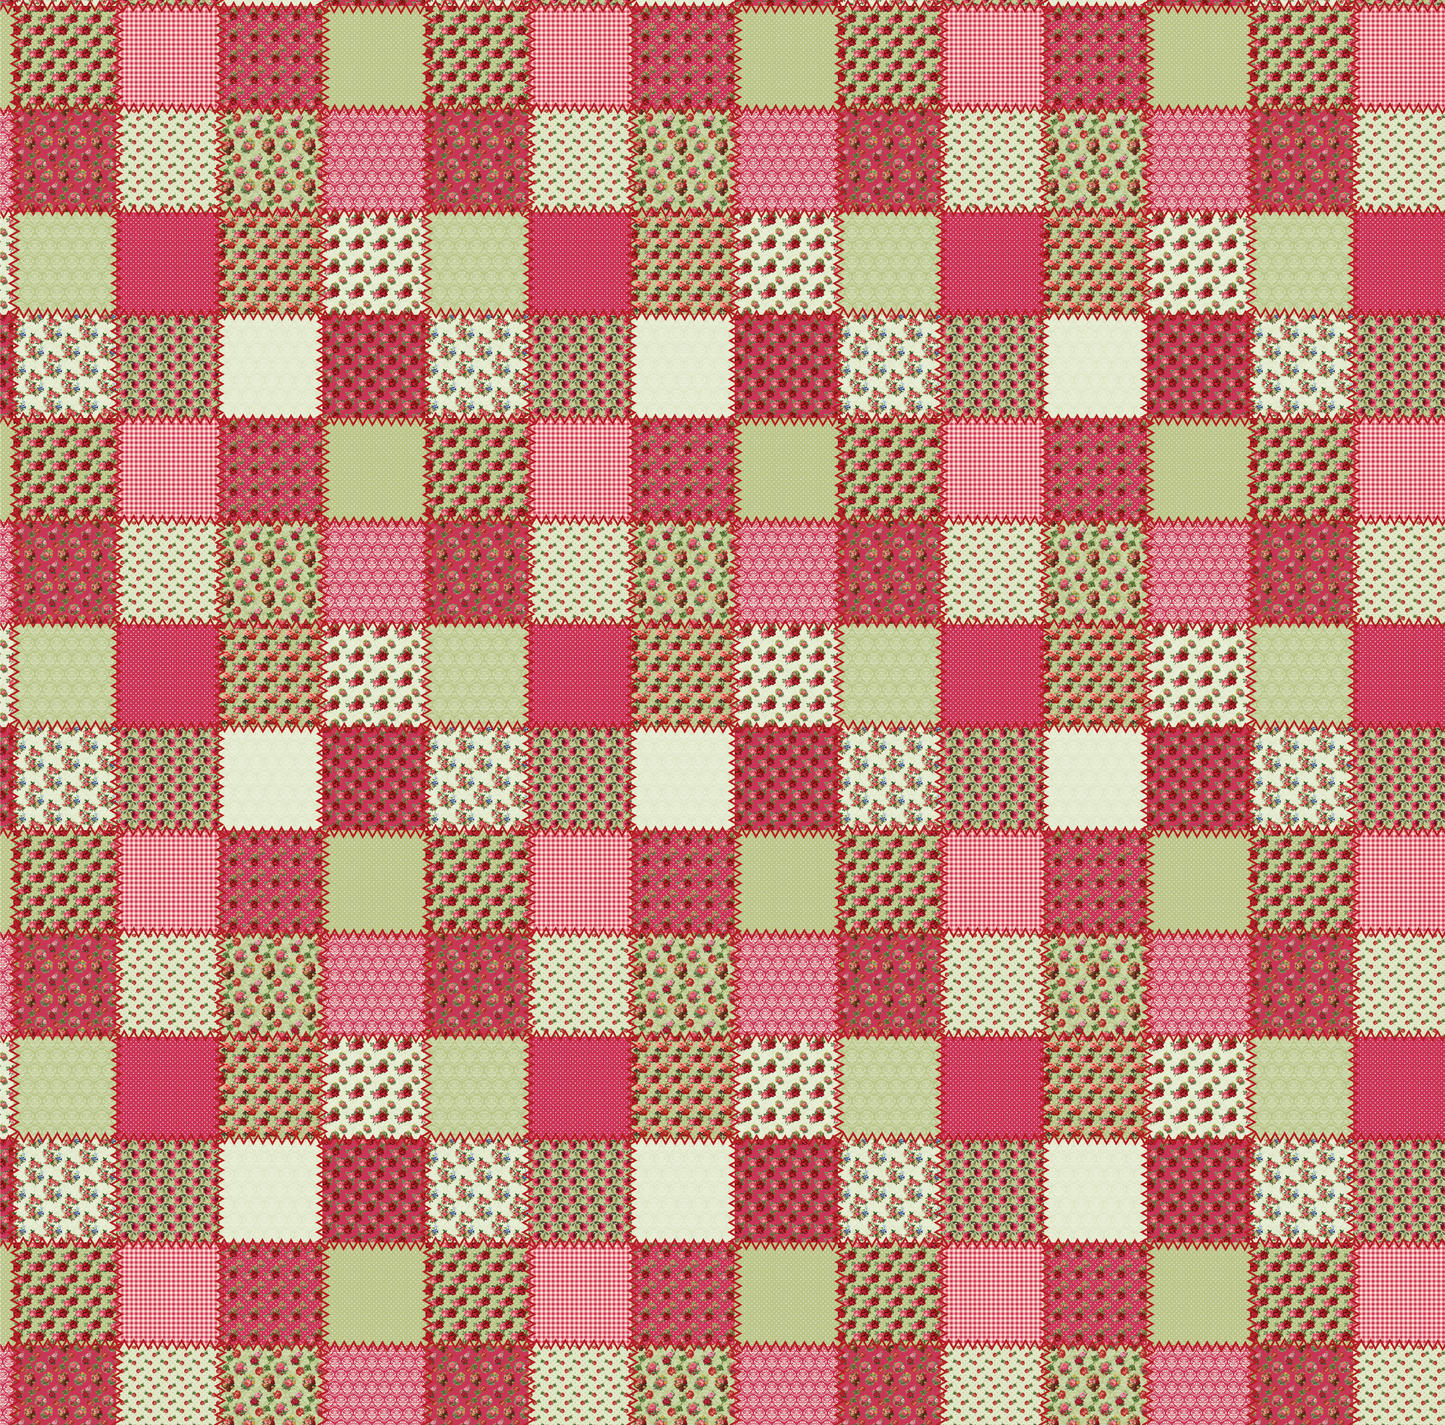 Patchwork - Pink and Green 007